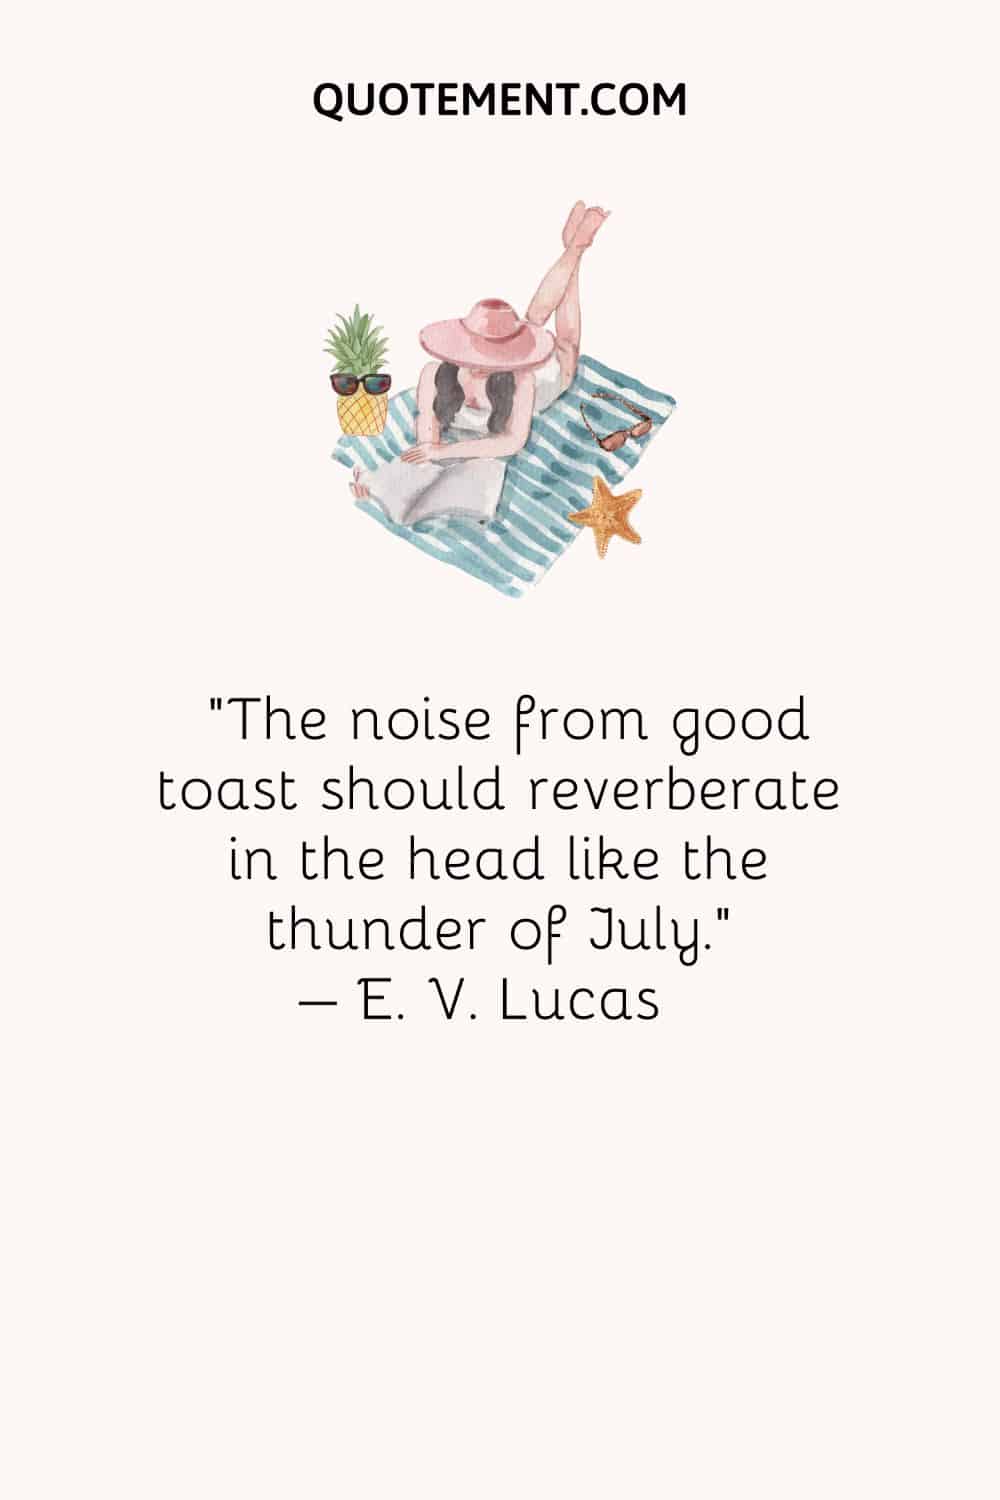 The noise from good toast should reverberate in the head like the thunder of July. – E. V. Lucas